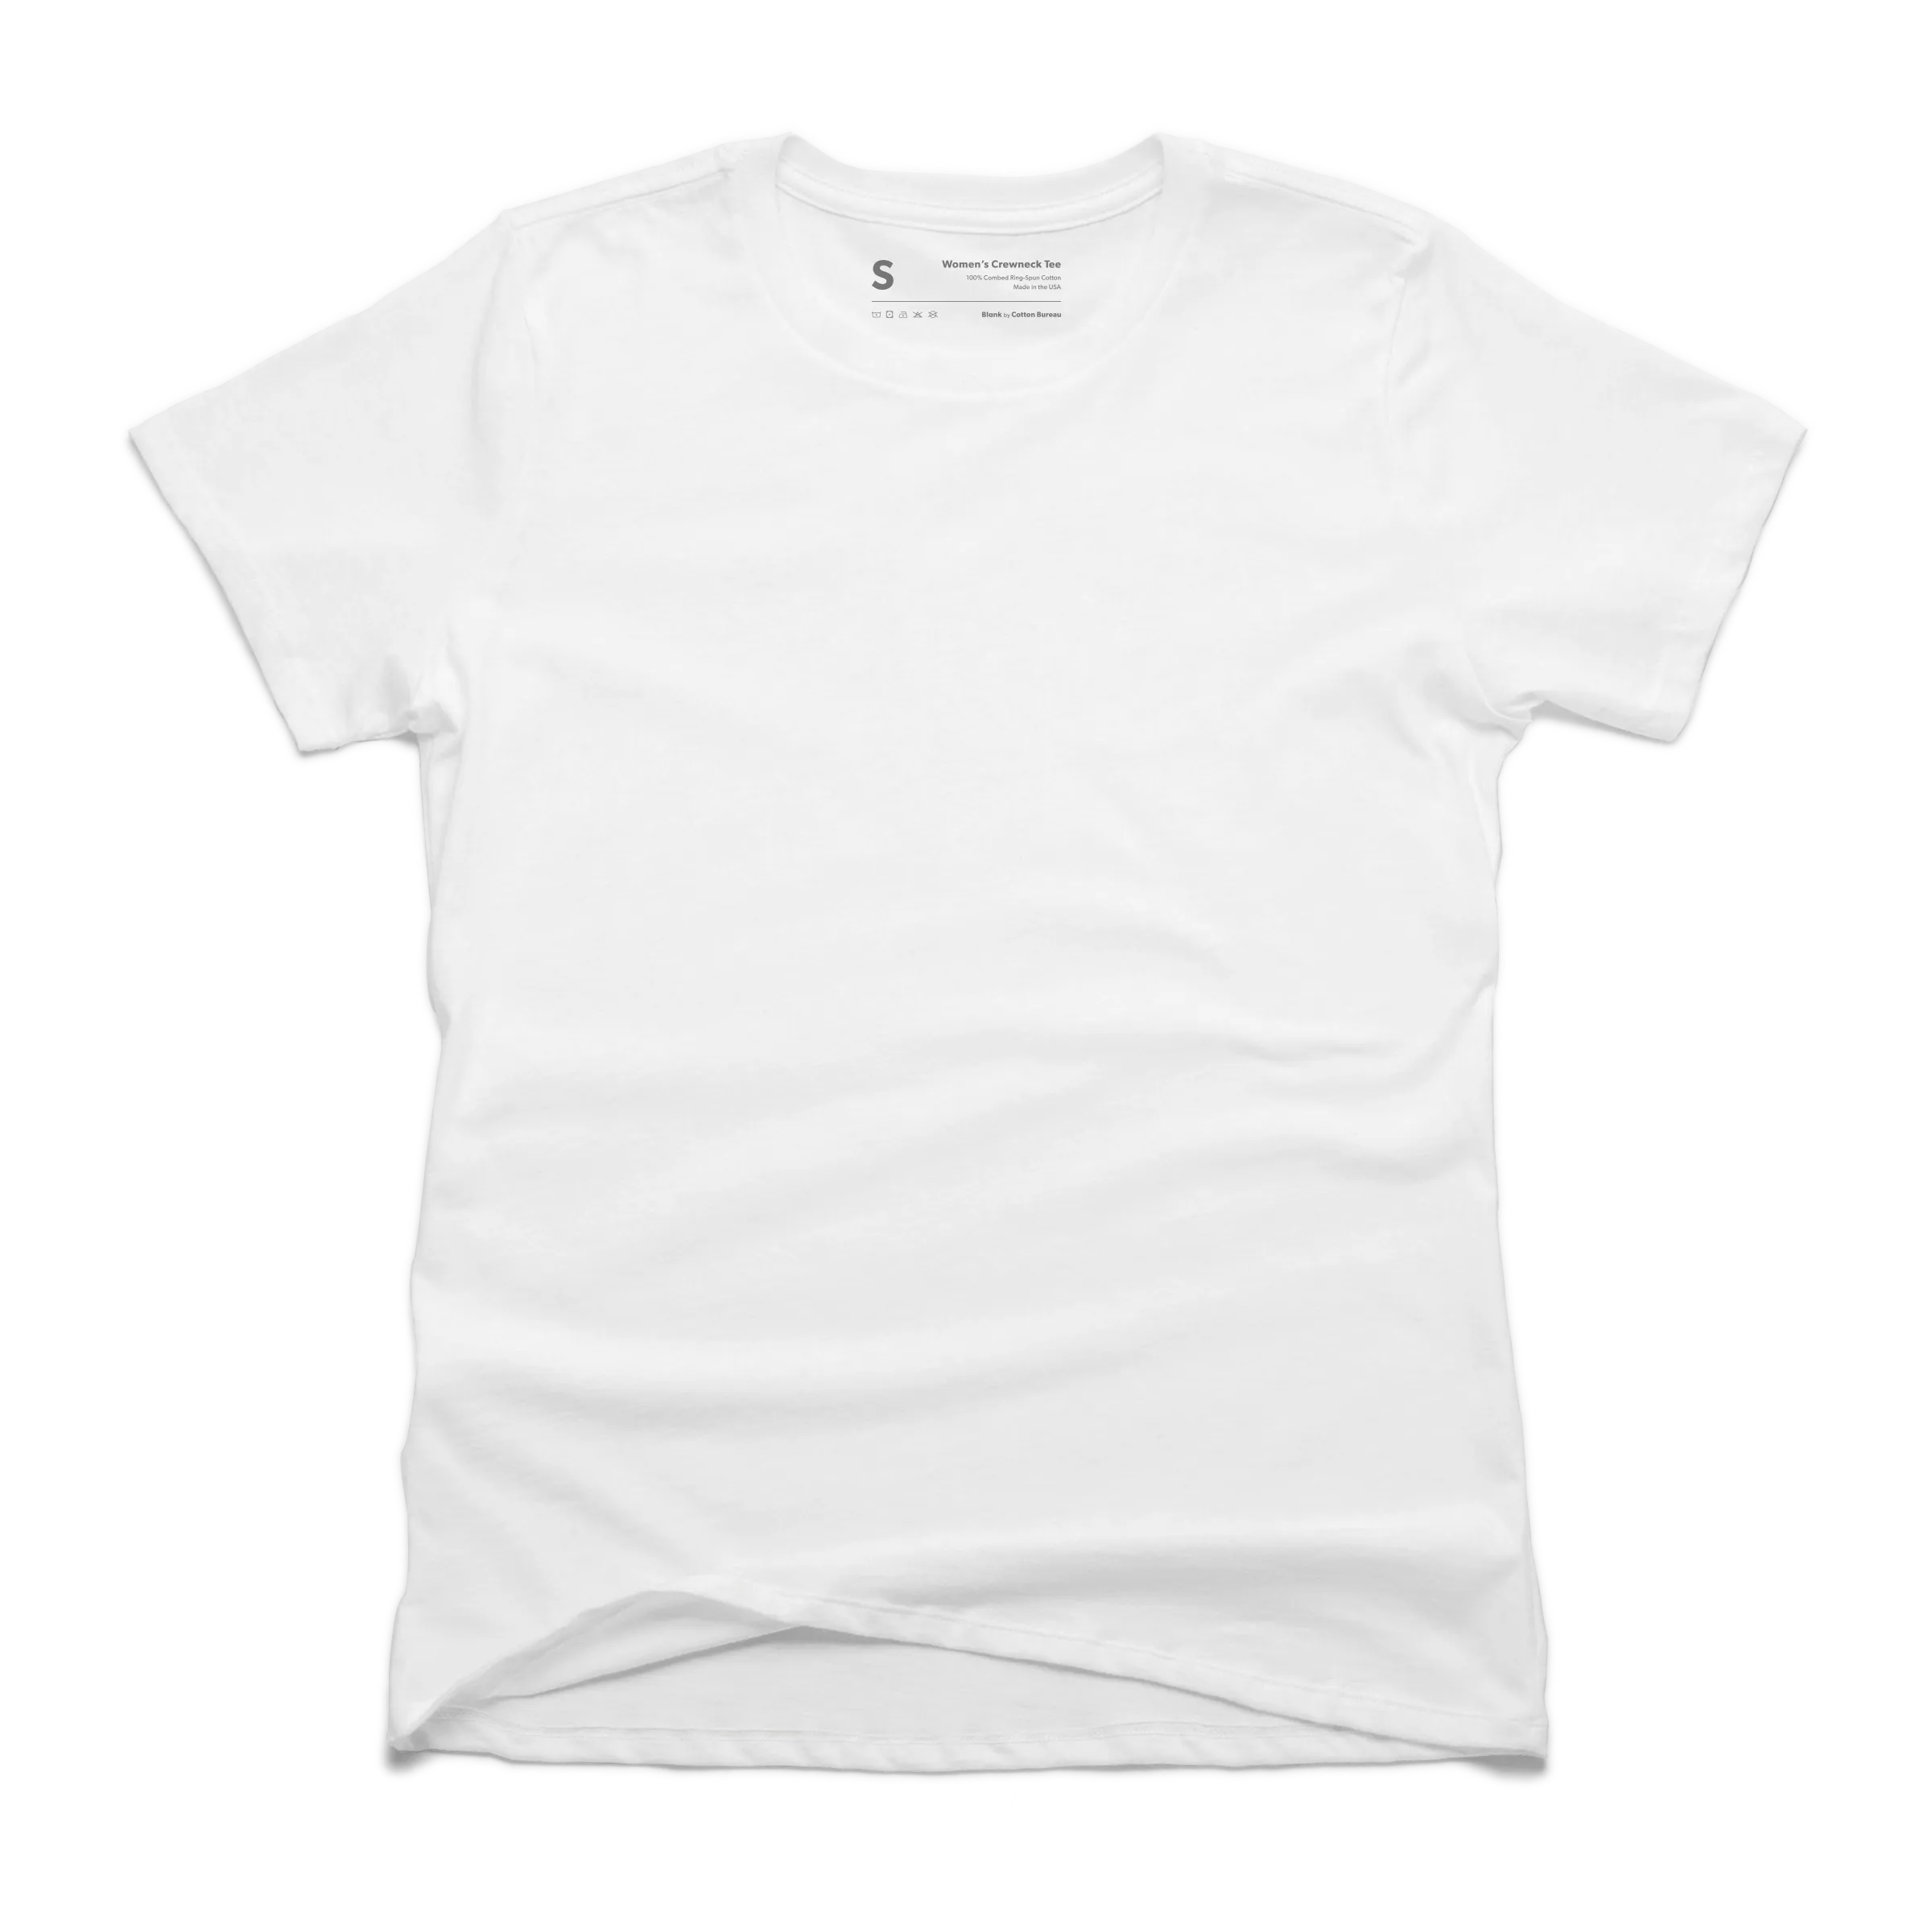 Men's 100% Cotton Premium Tee” graphic tee by Blank by Cotton